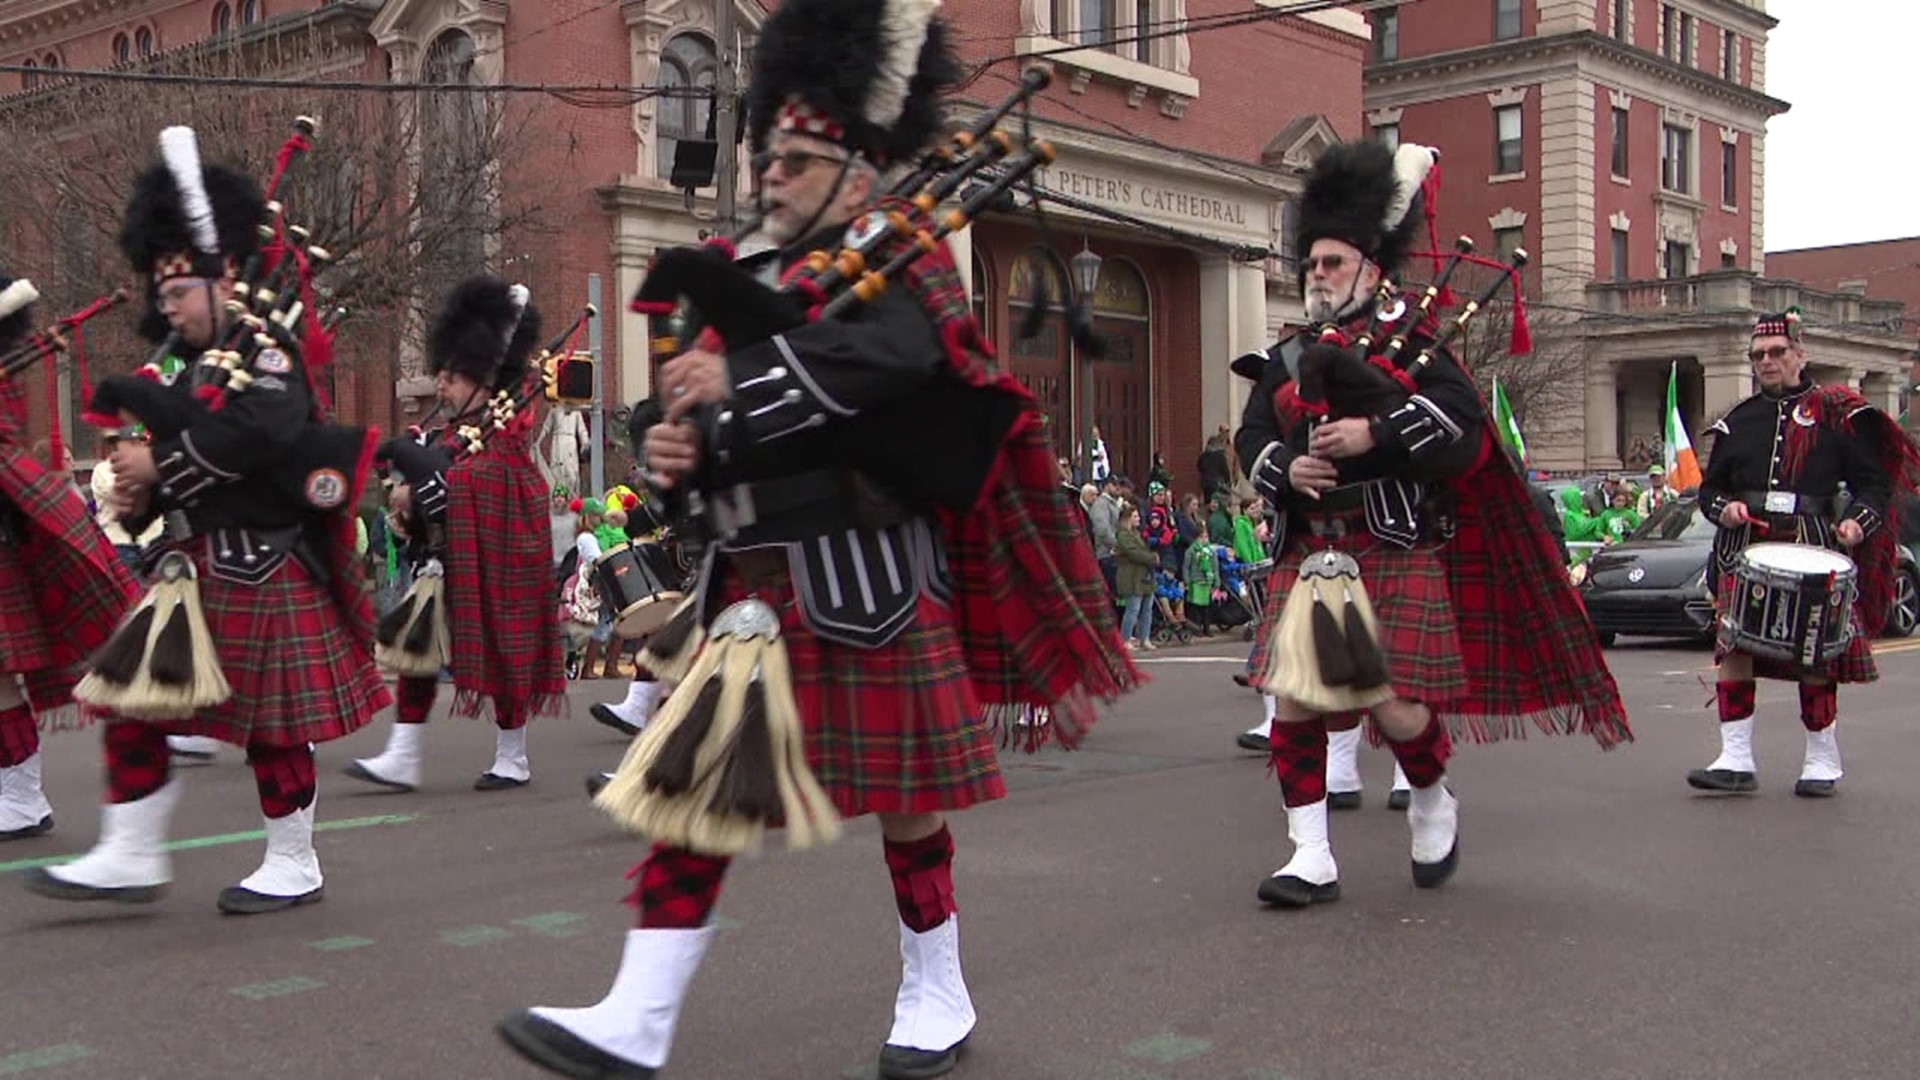 Folks braved the rain Saturday for one of the biggest St. Patrick's celebrations in the country.